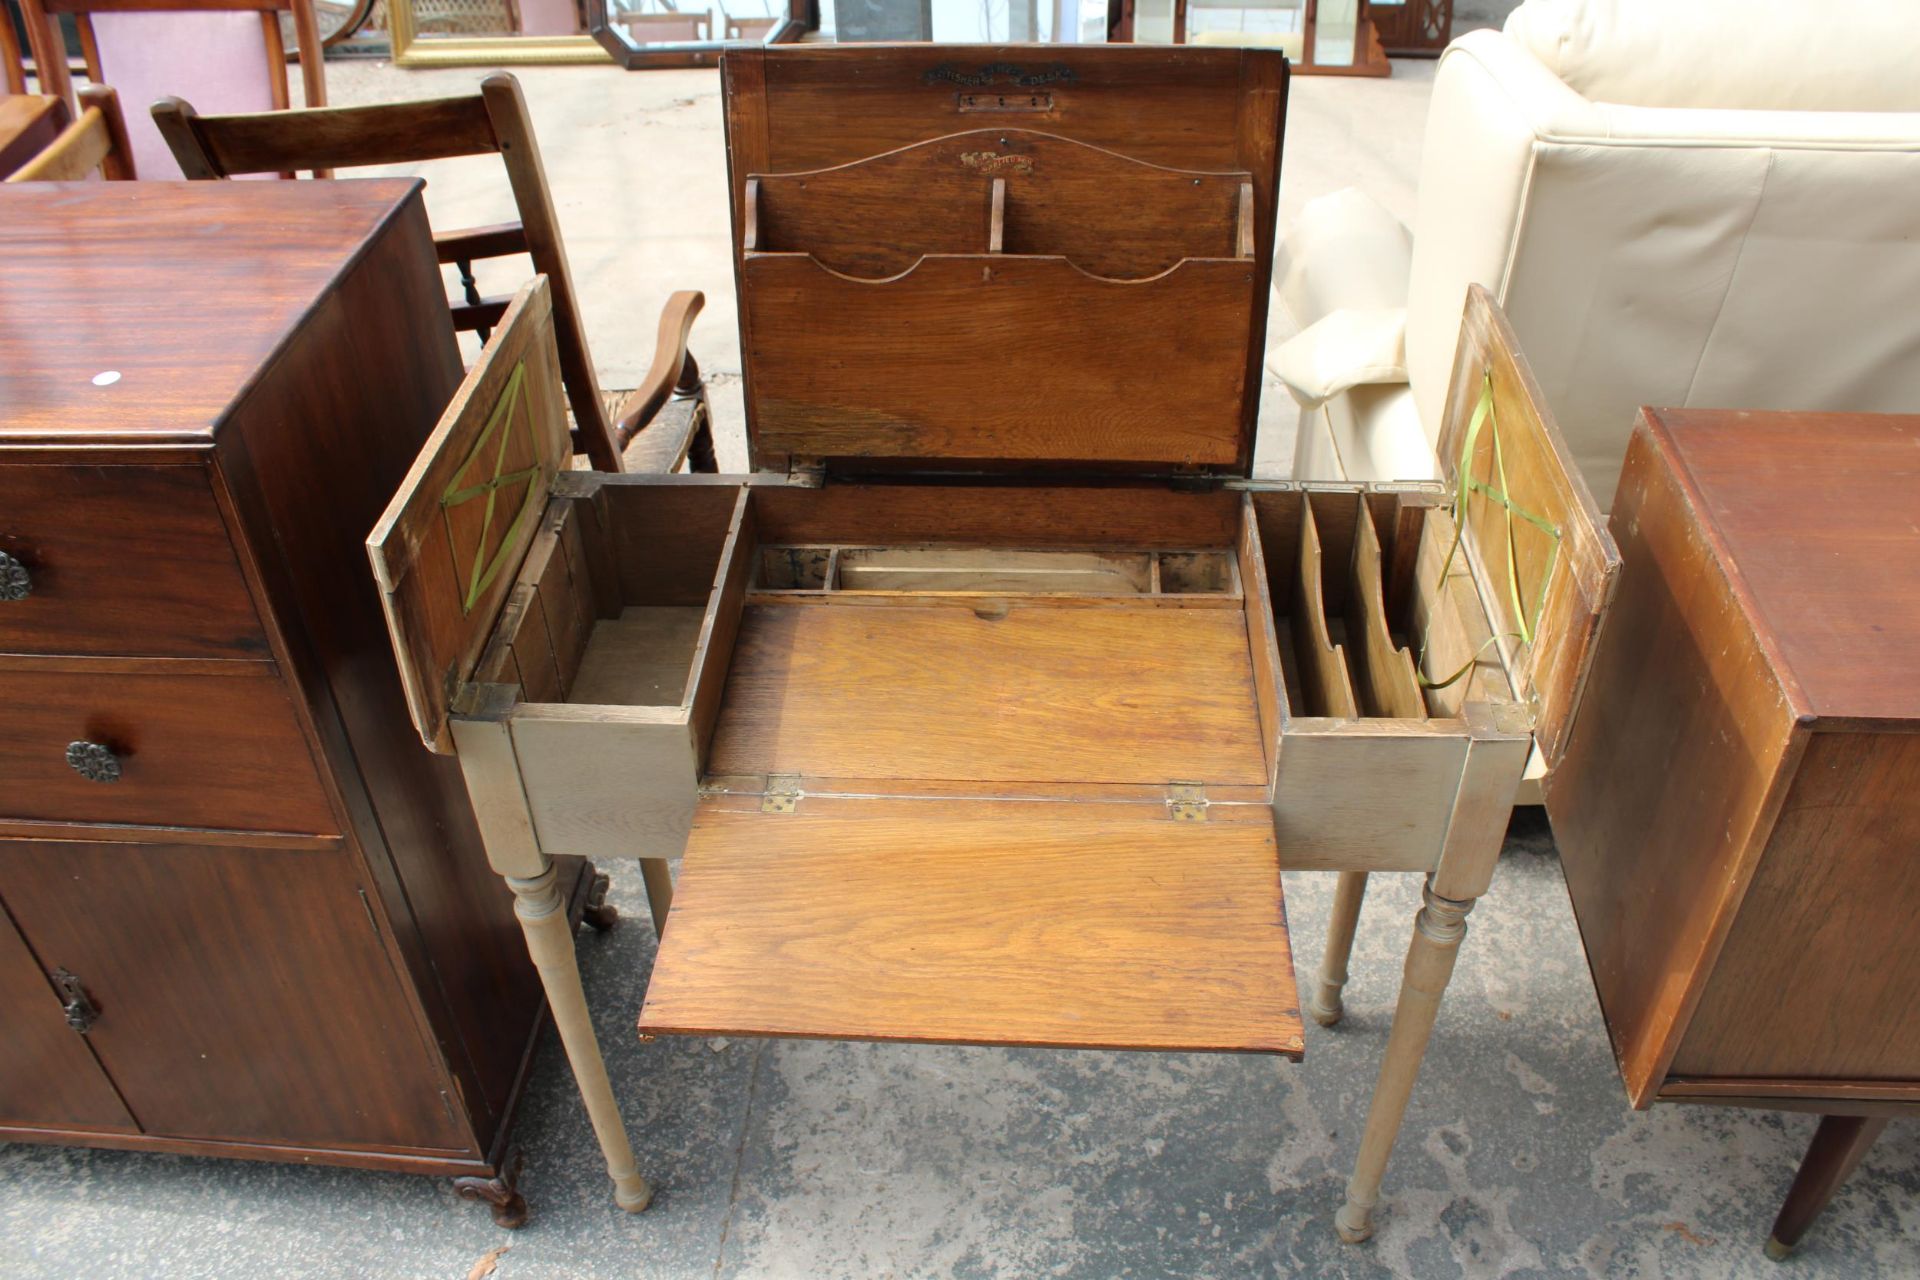 AN EARLY 20TH CENTURY OAK 'THE BRITISHER DESK' WITH FOLD-OUT WRITING AND STORAGE SECTIONS, 36" WIDE - Image 2 of 6